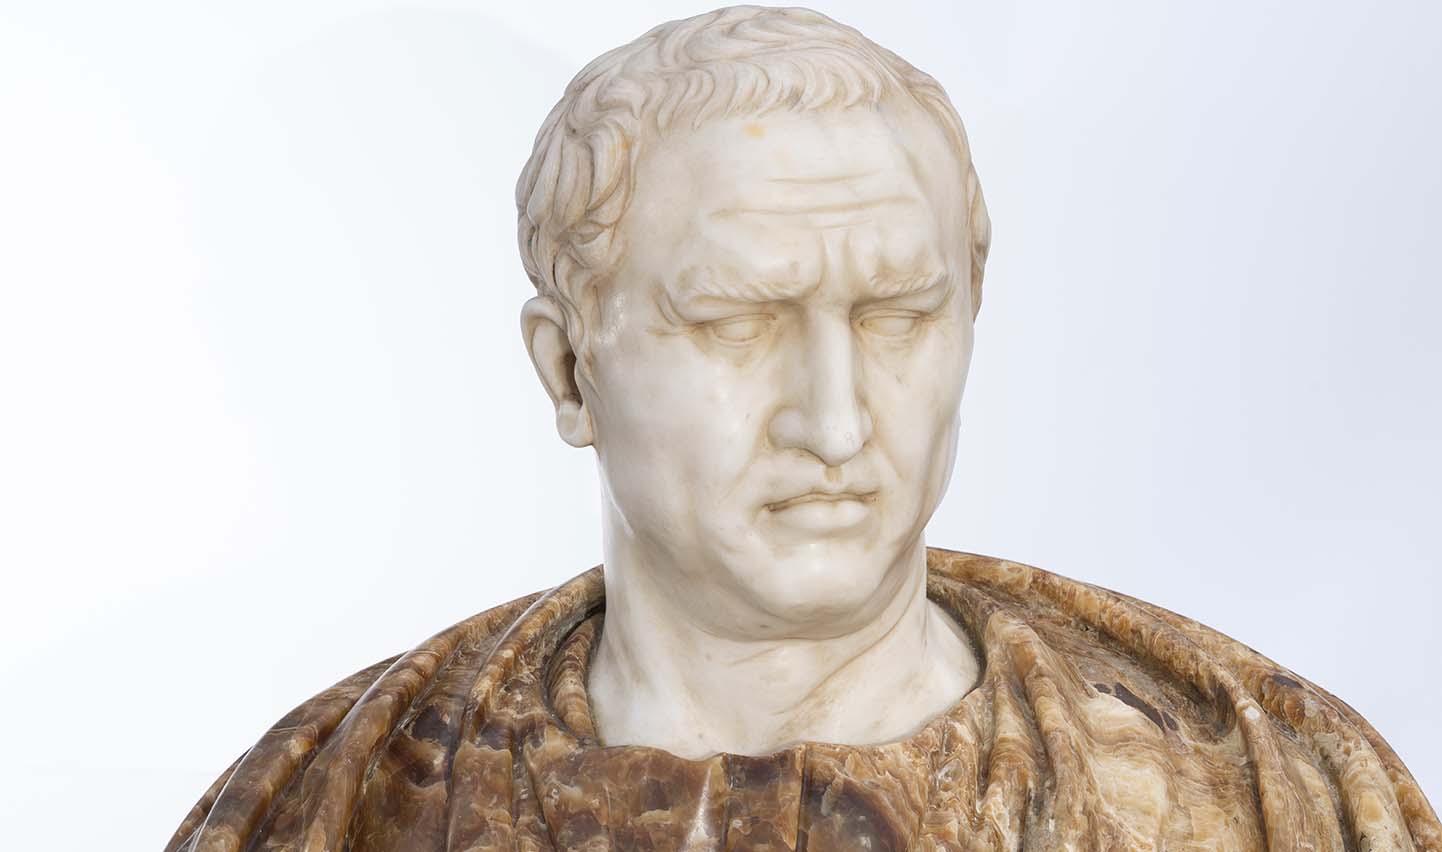 Cicero bust in moulded marble. Height 38 cm. - Decorar con Arte